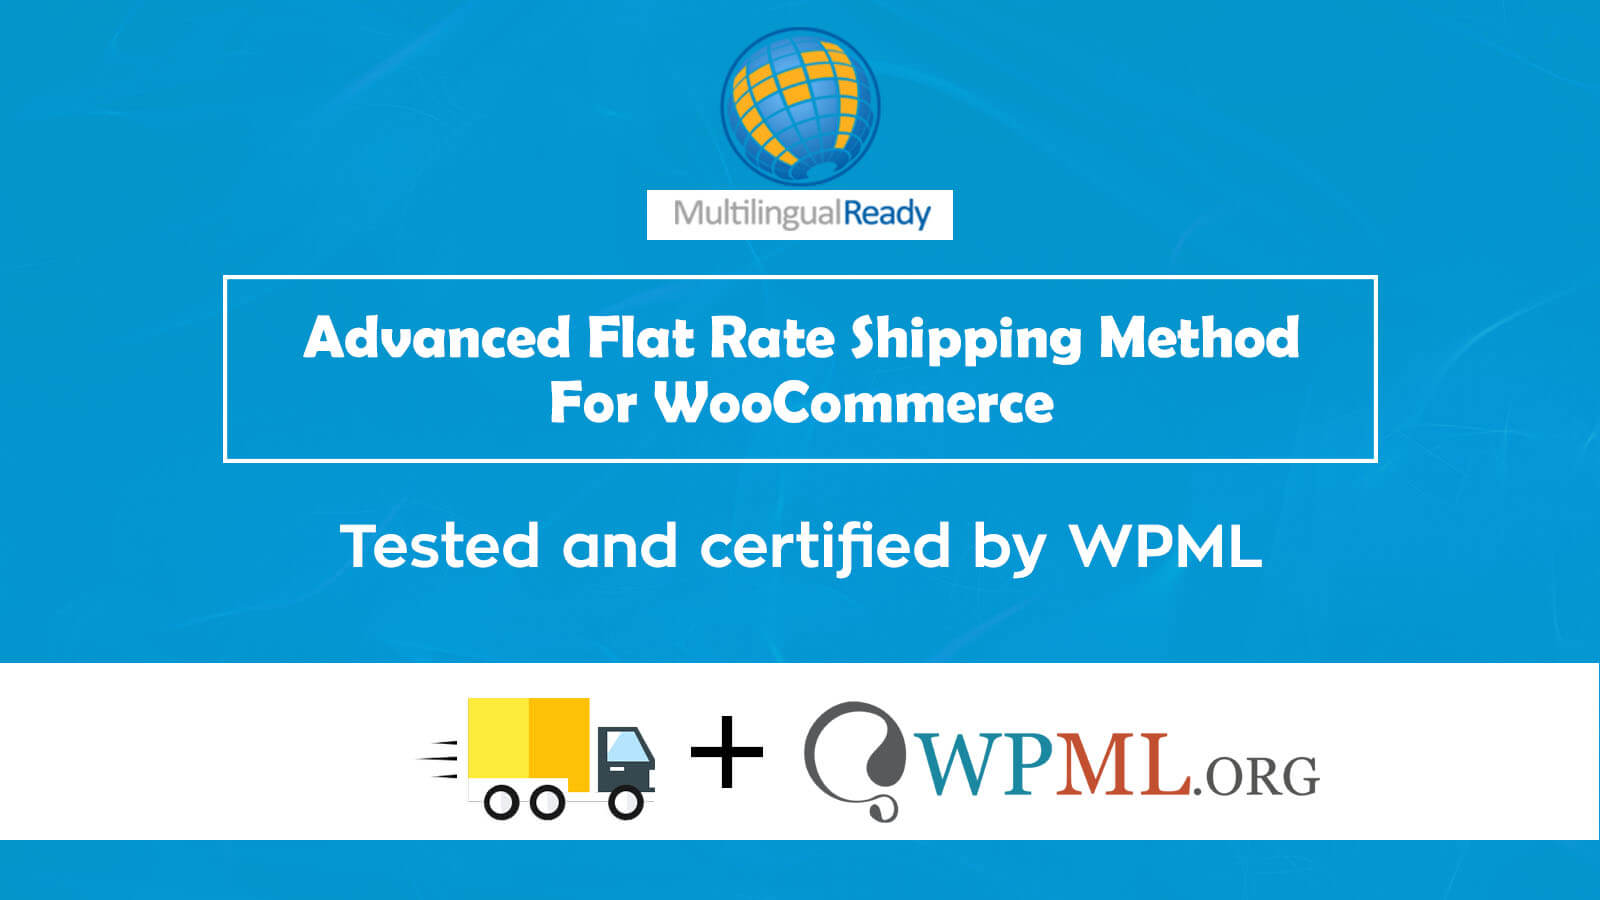 It’s Official! The Advanced Flat Rate Shipping Method For WooCommerce Plugin is now WPML Compatible